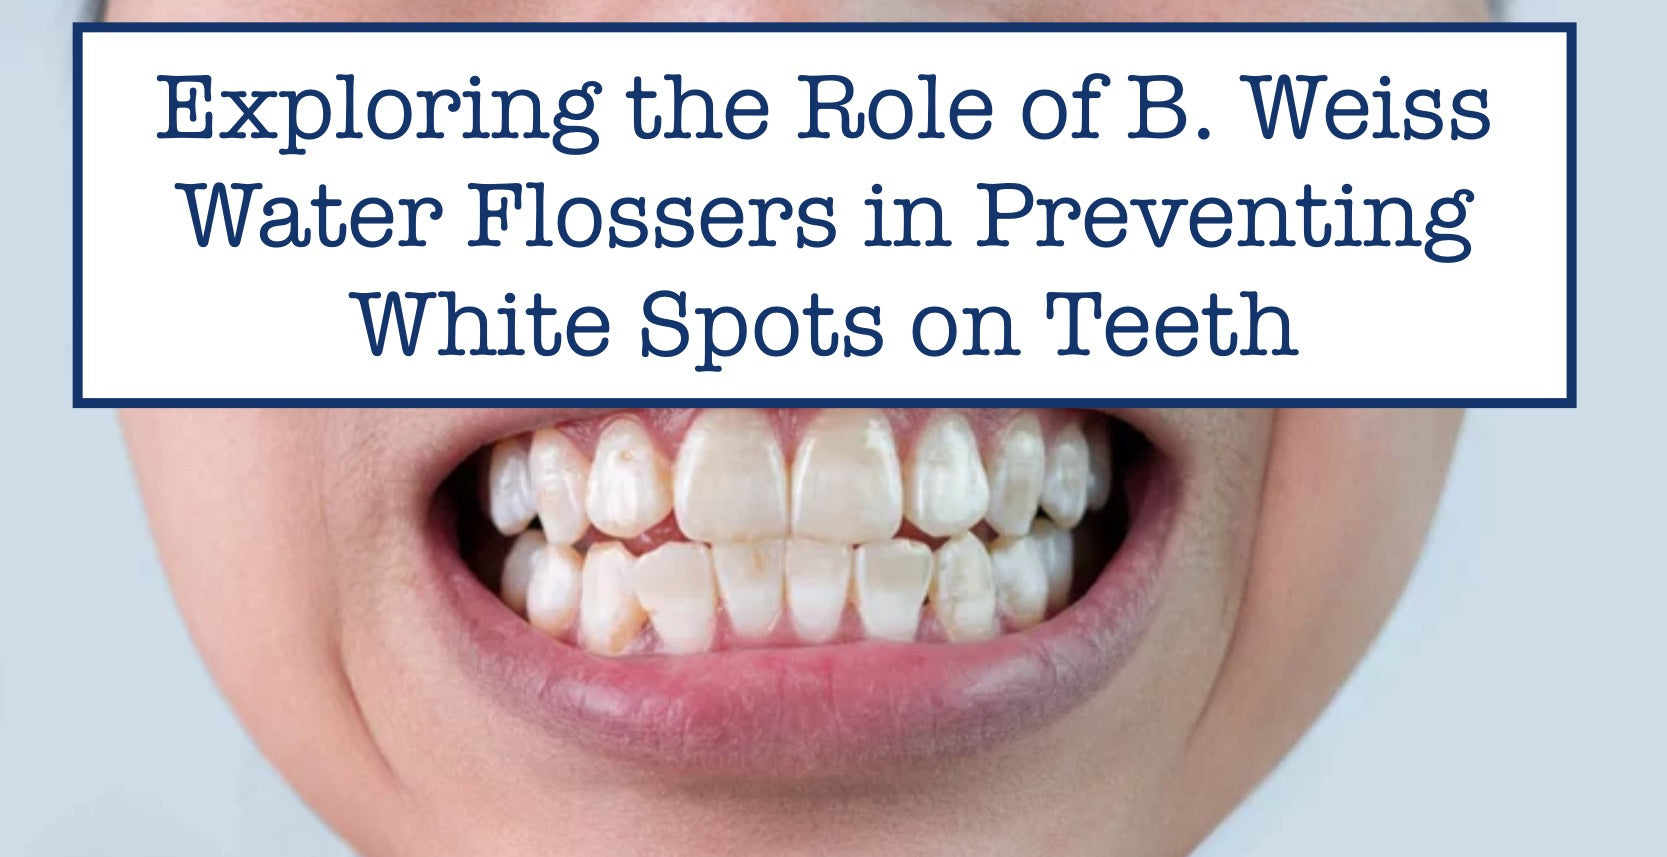 Exploring the Role of B. Weiss Water Flossers in Preventing White Spots on Teeth